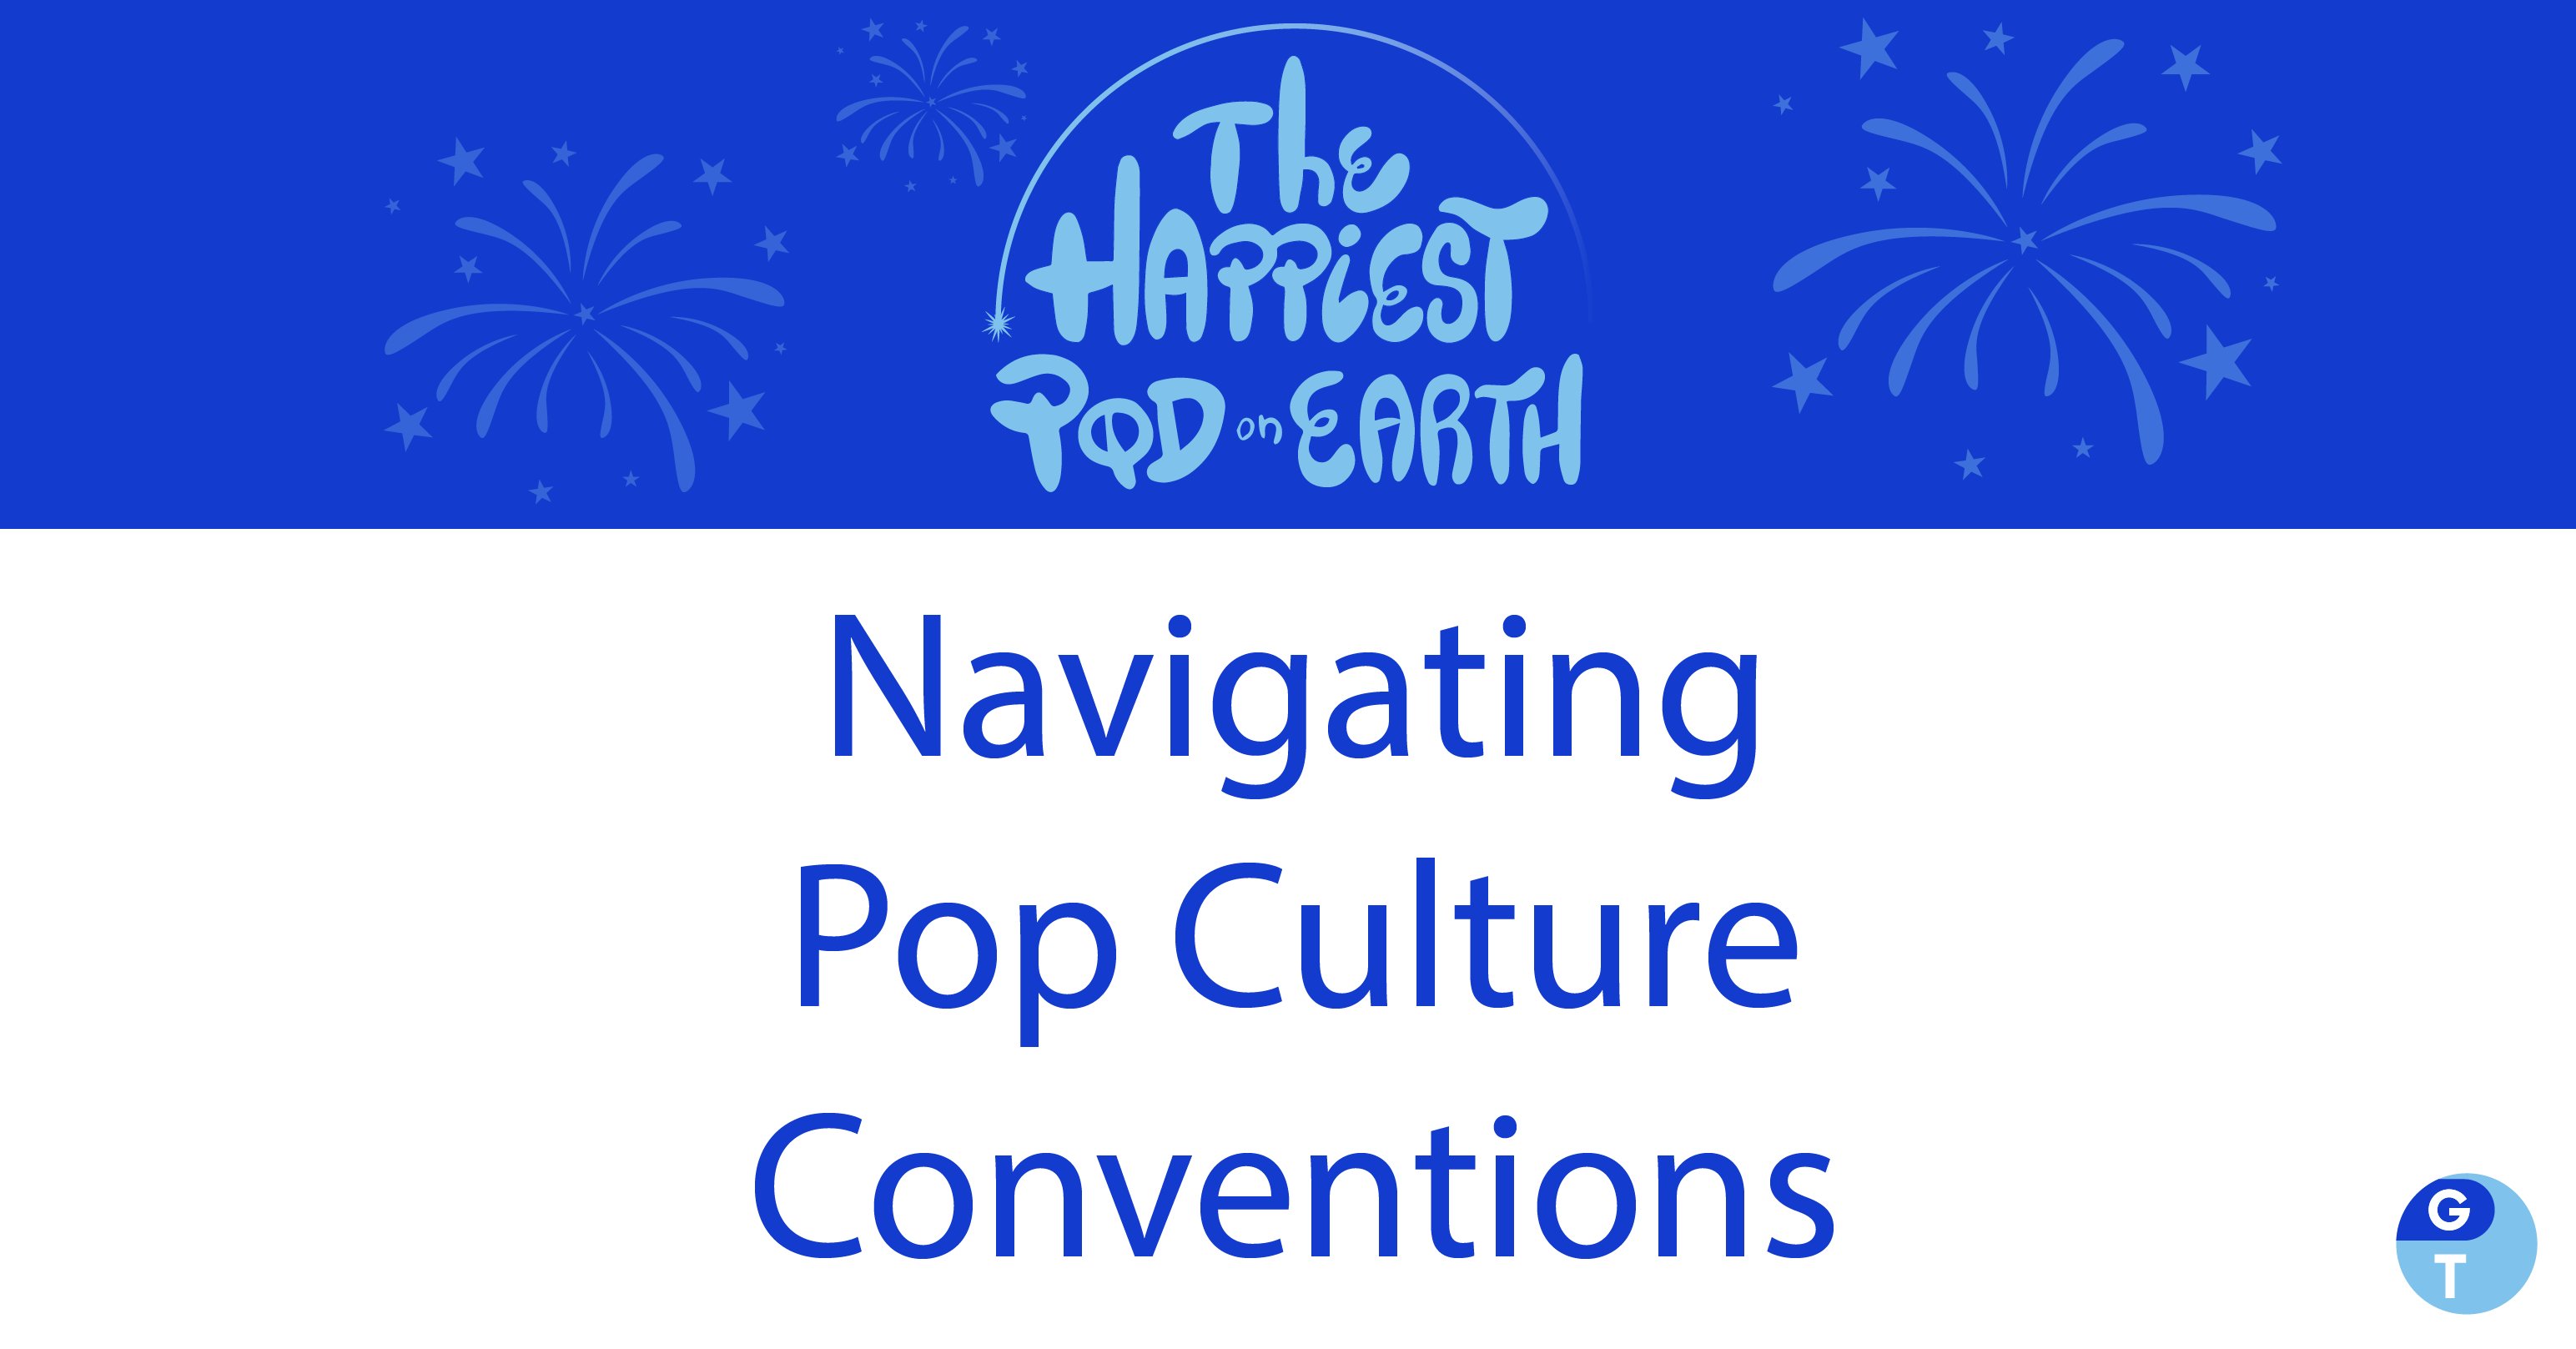 podcast logo of fireworks and podcast name "Navigating Pop Culture Conventions"